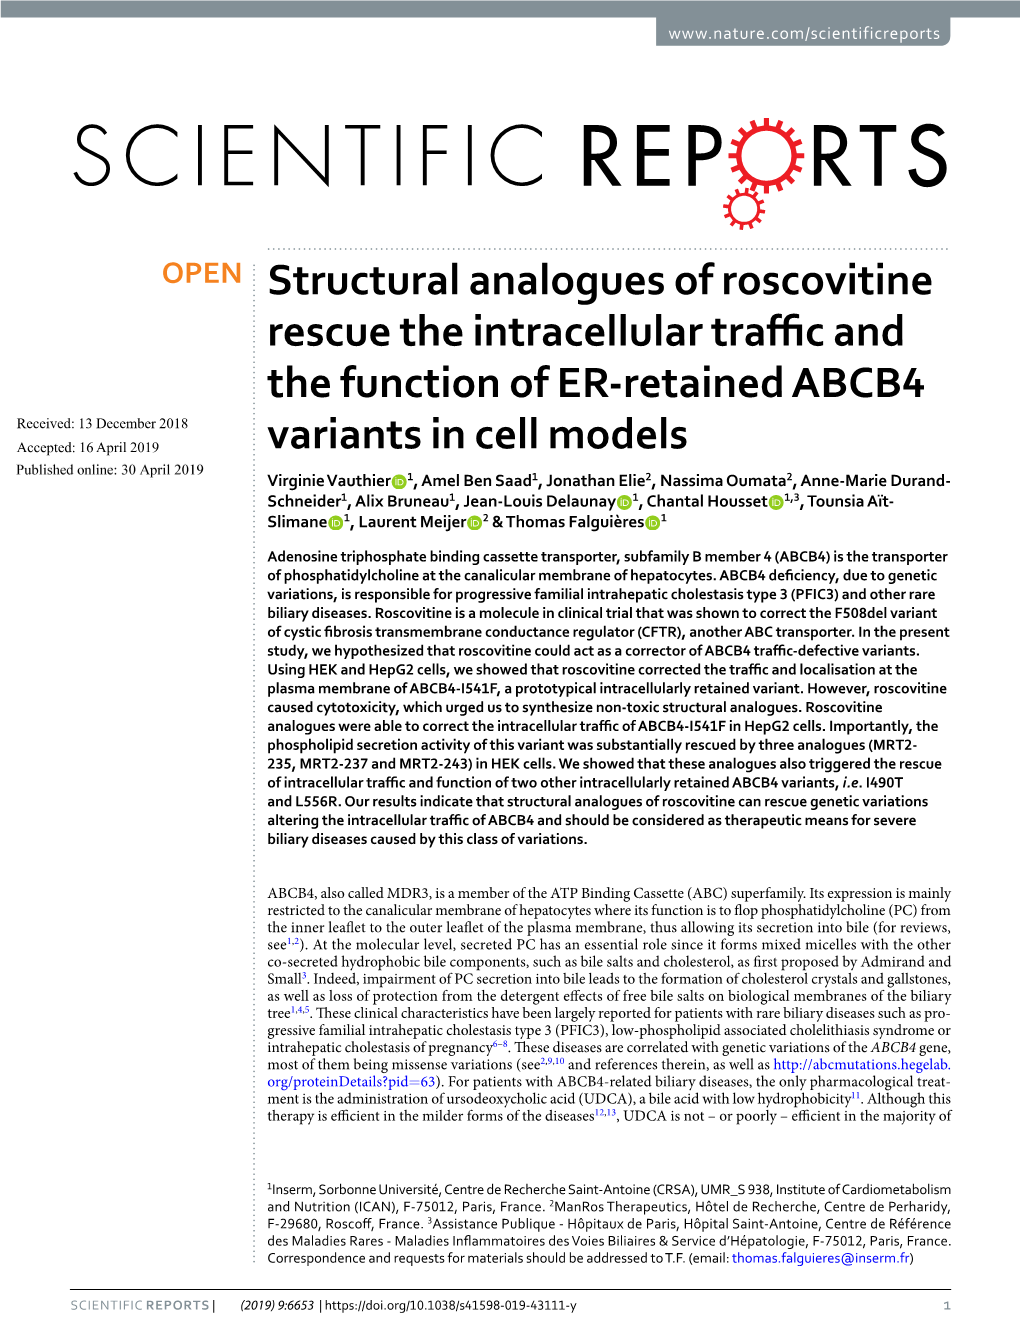 Structural Analogues of Roscovitine Rescue the Intracellular Traffic And